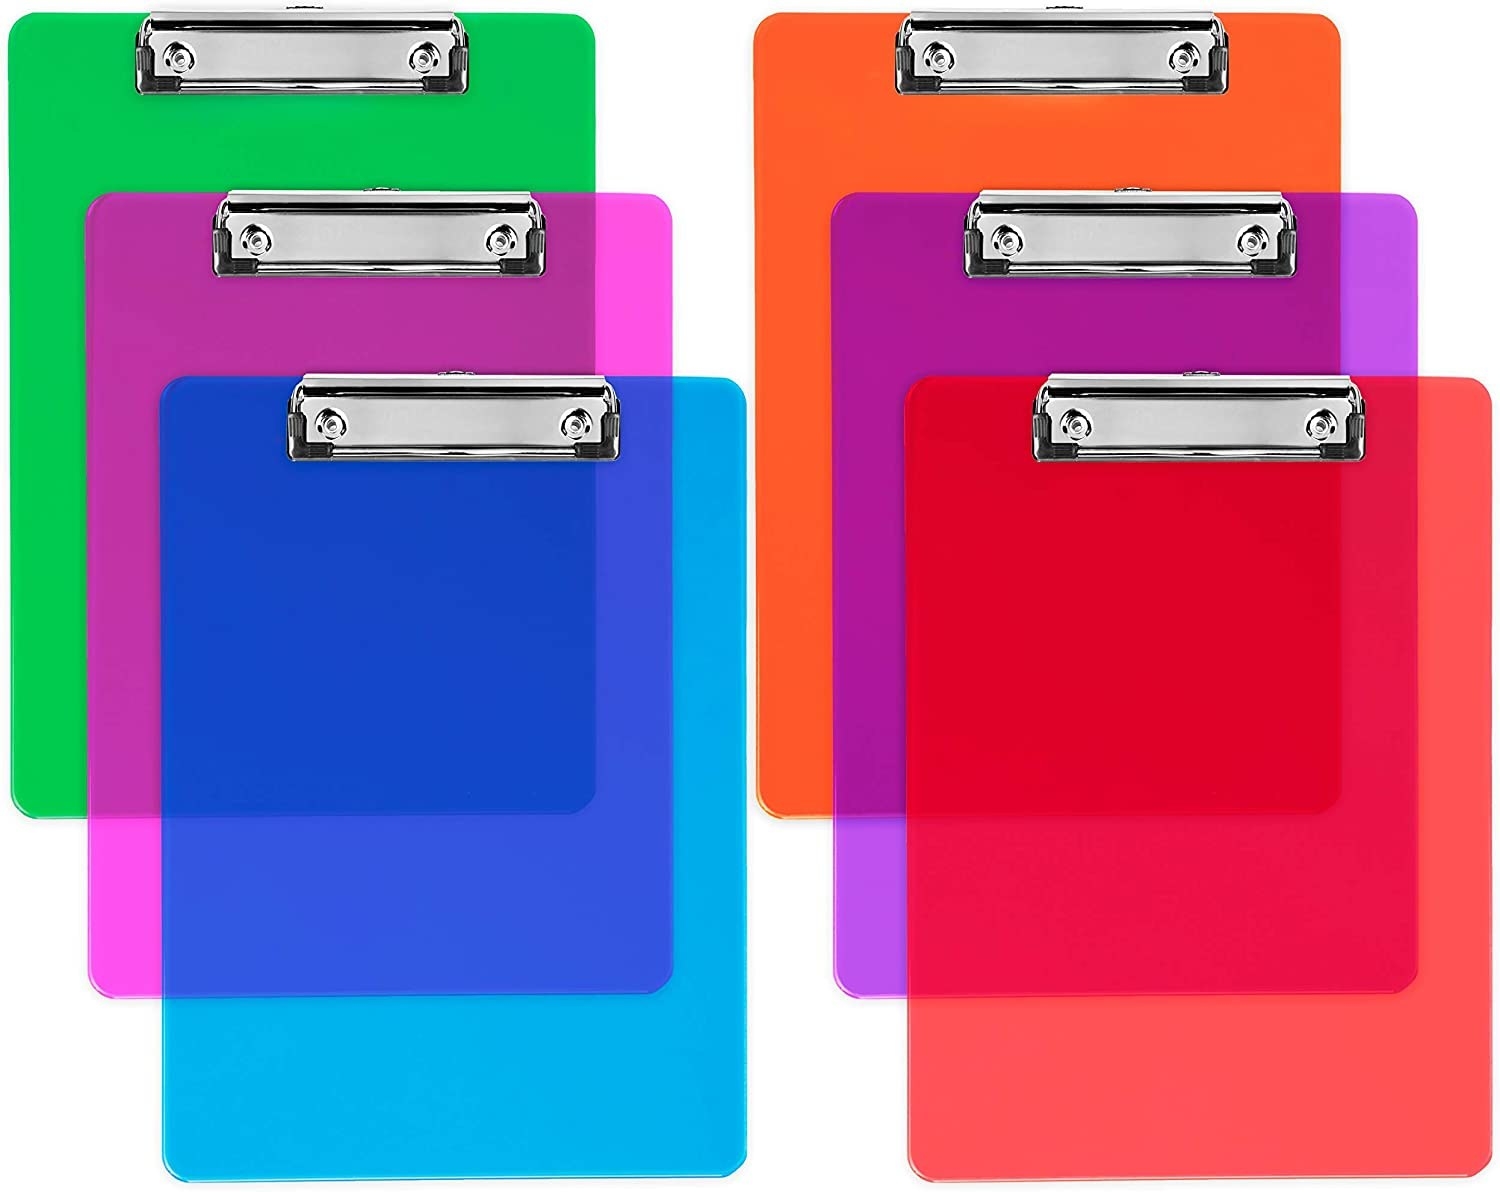 Six colorful clipboards